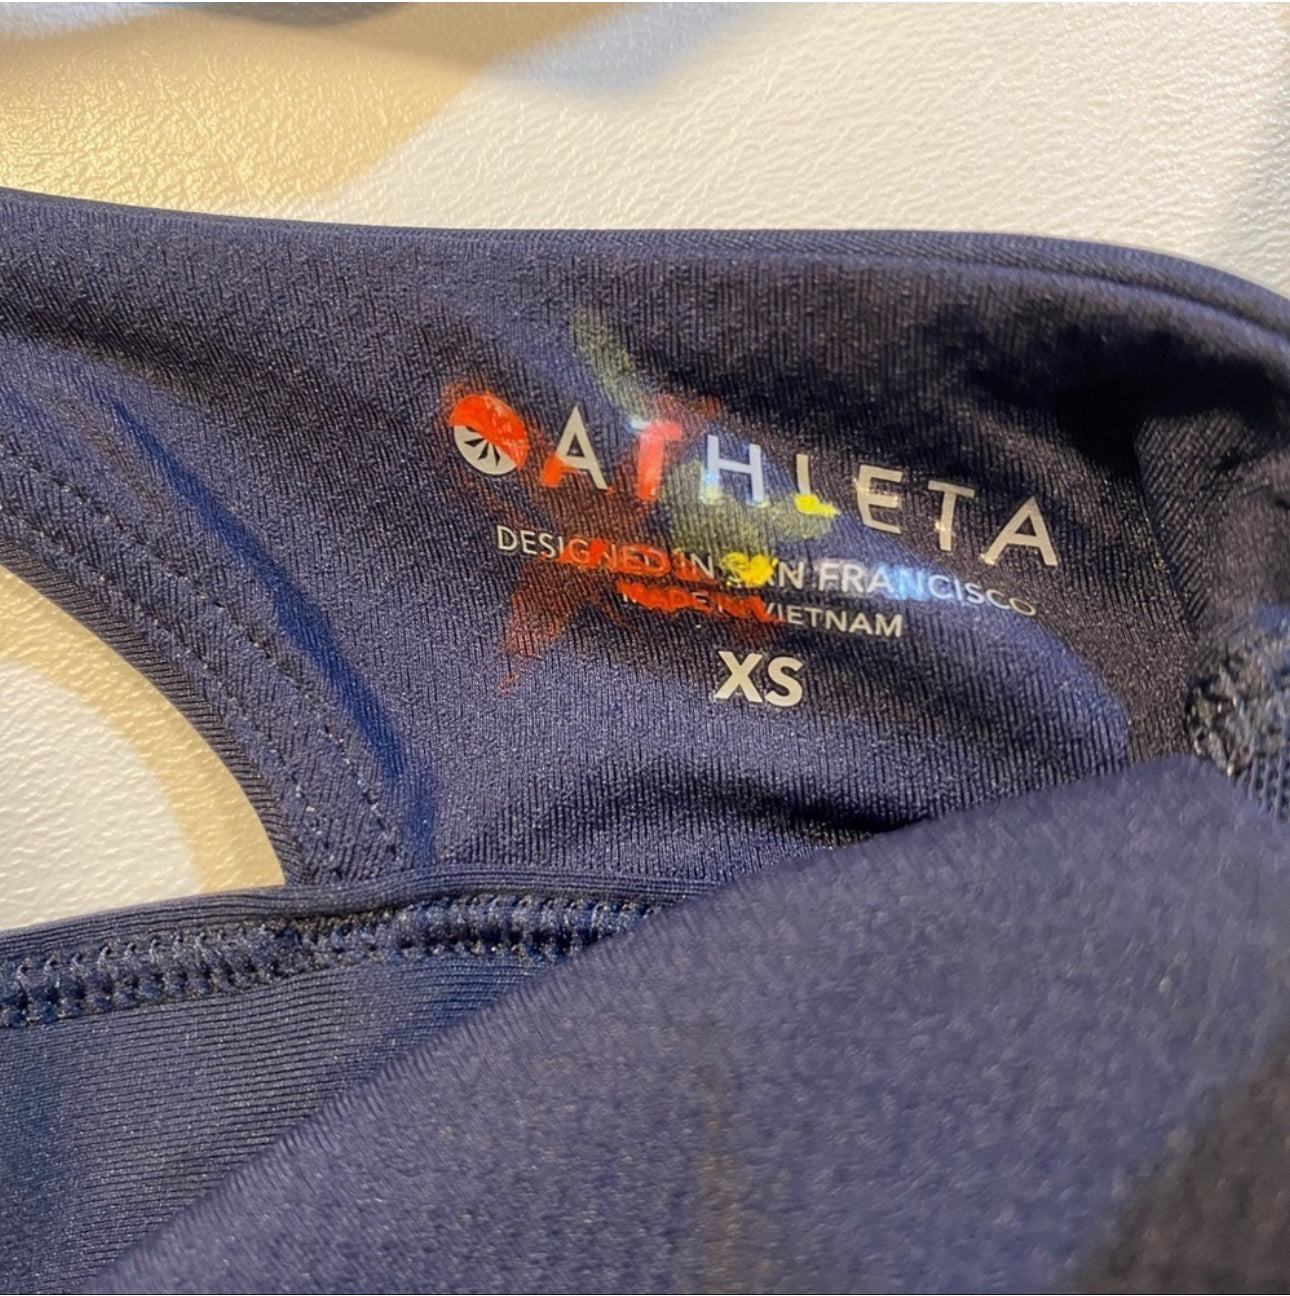 NWT $69 Athleta Size XS Navy 2 In 1 Ultimate Support Supersonic Top W Built In Bra